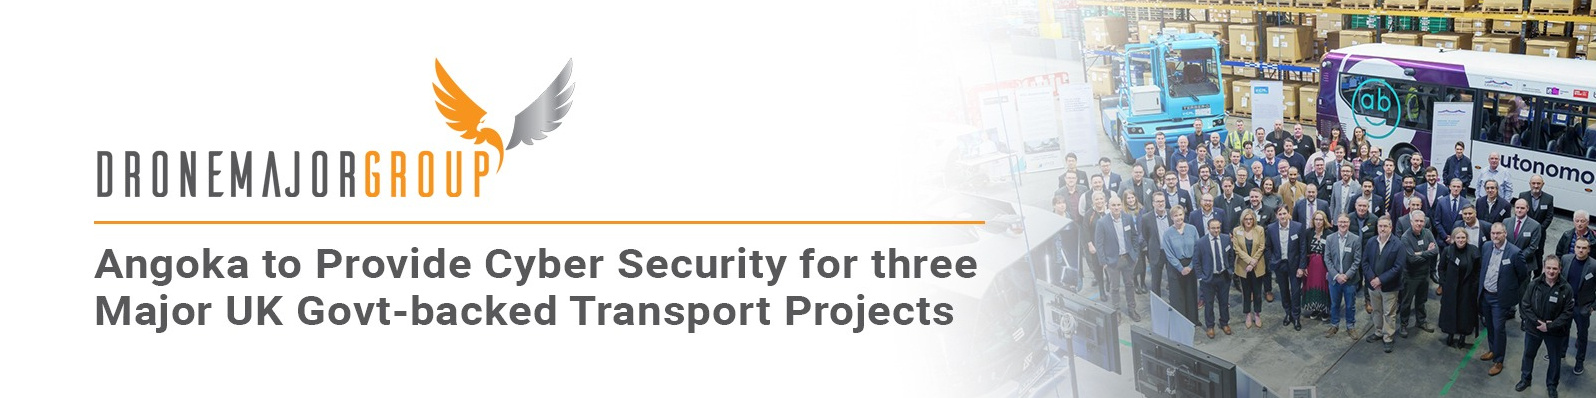 ANGOKA TO PROVIDE CYBER SECURITY FOR THREE MAJOR UK GOVT-BACKED FUTURE OF TRANSPORT PROJECTS